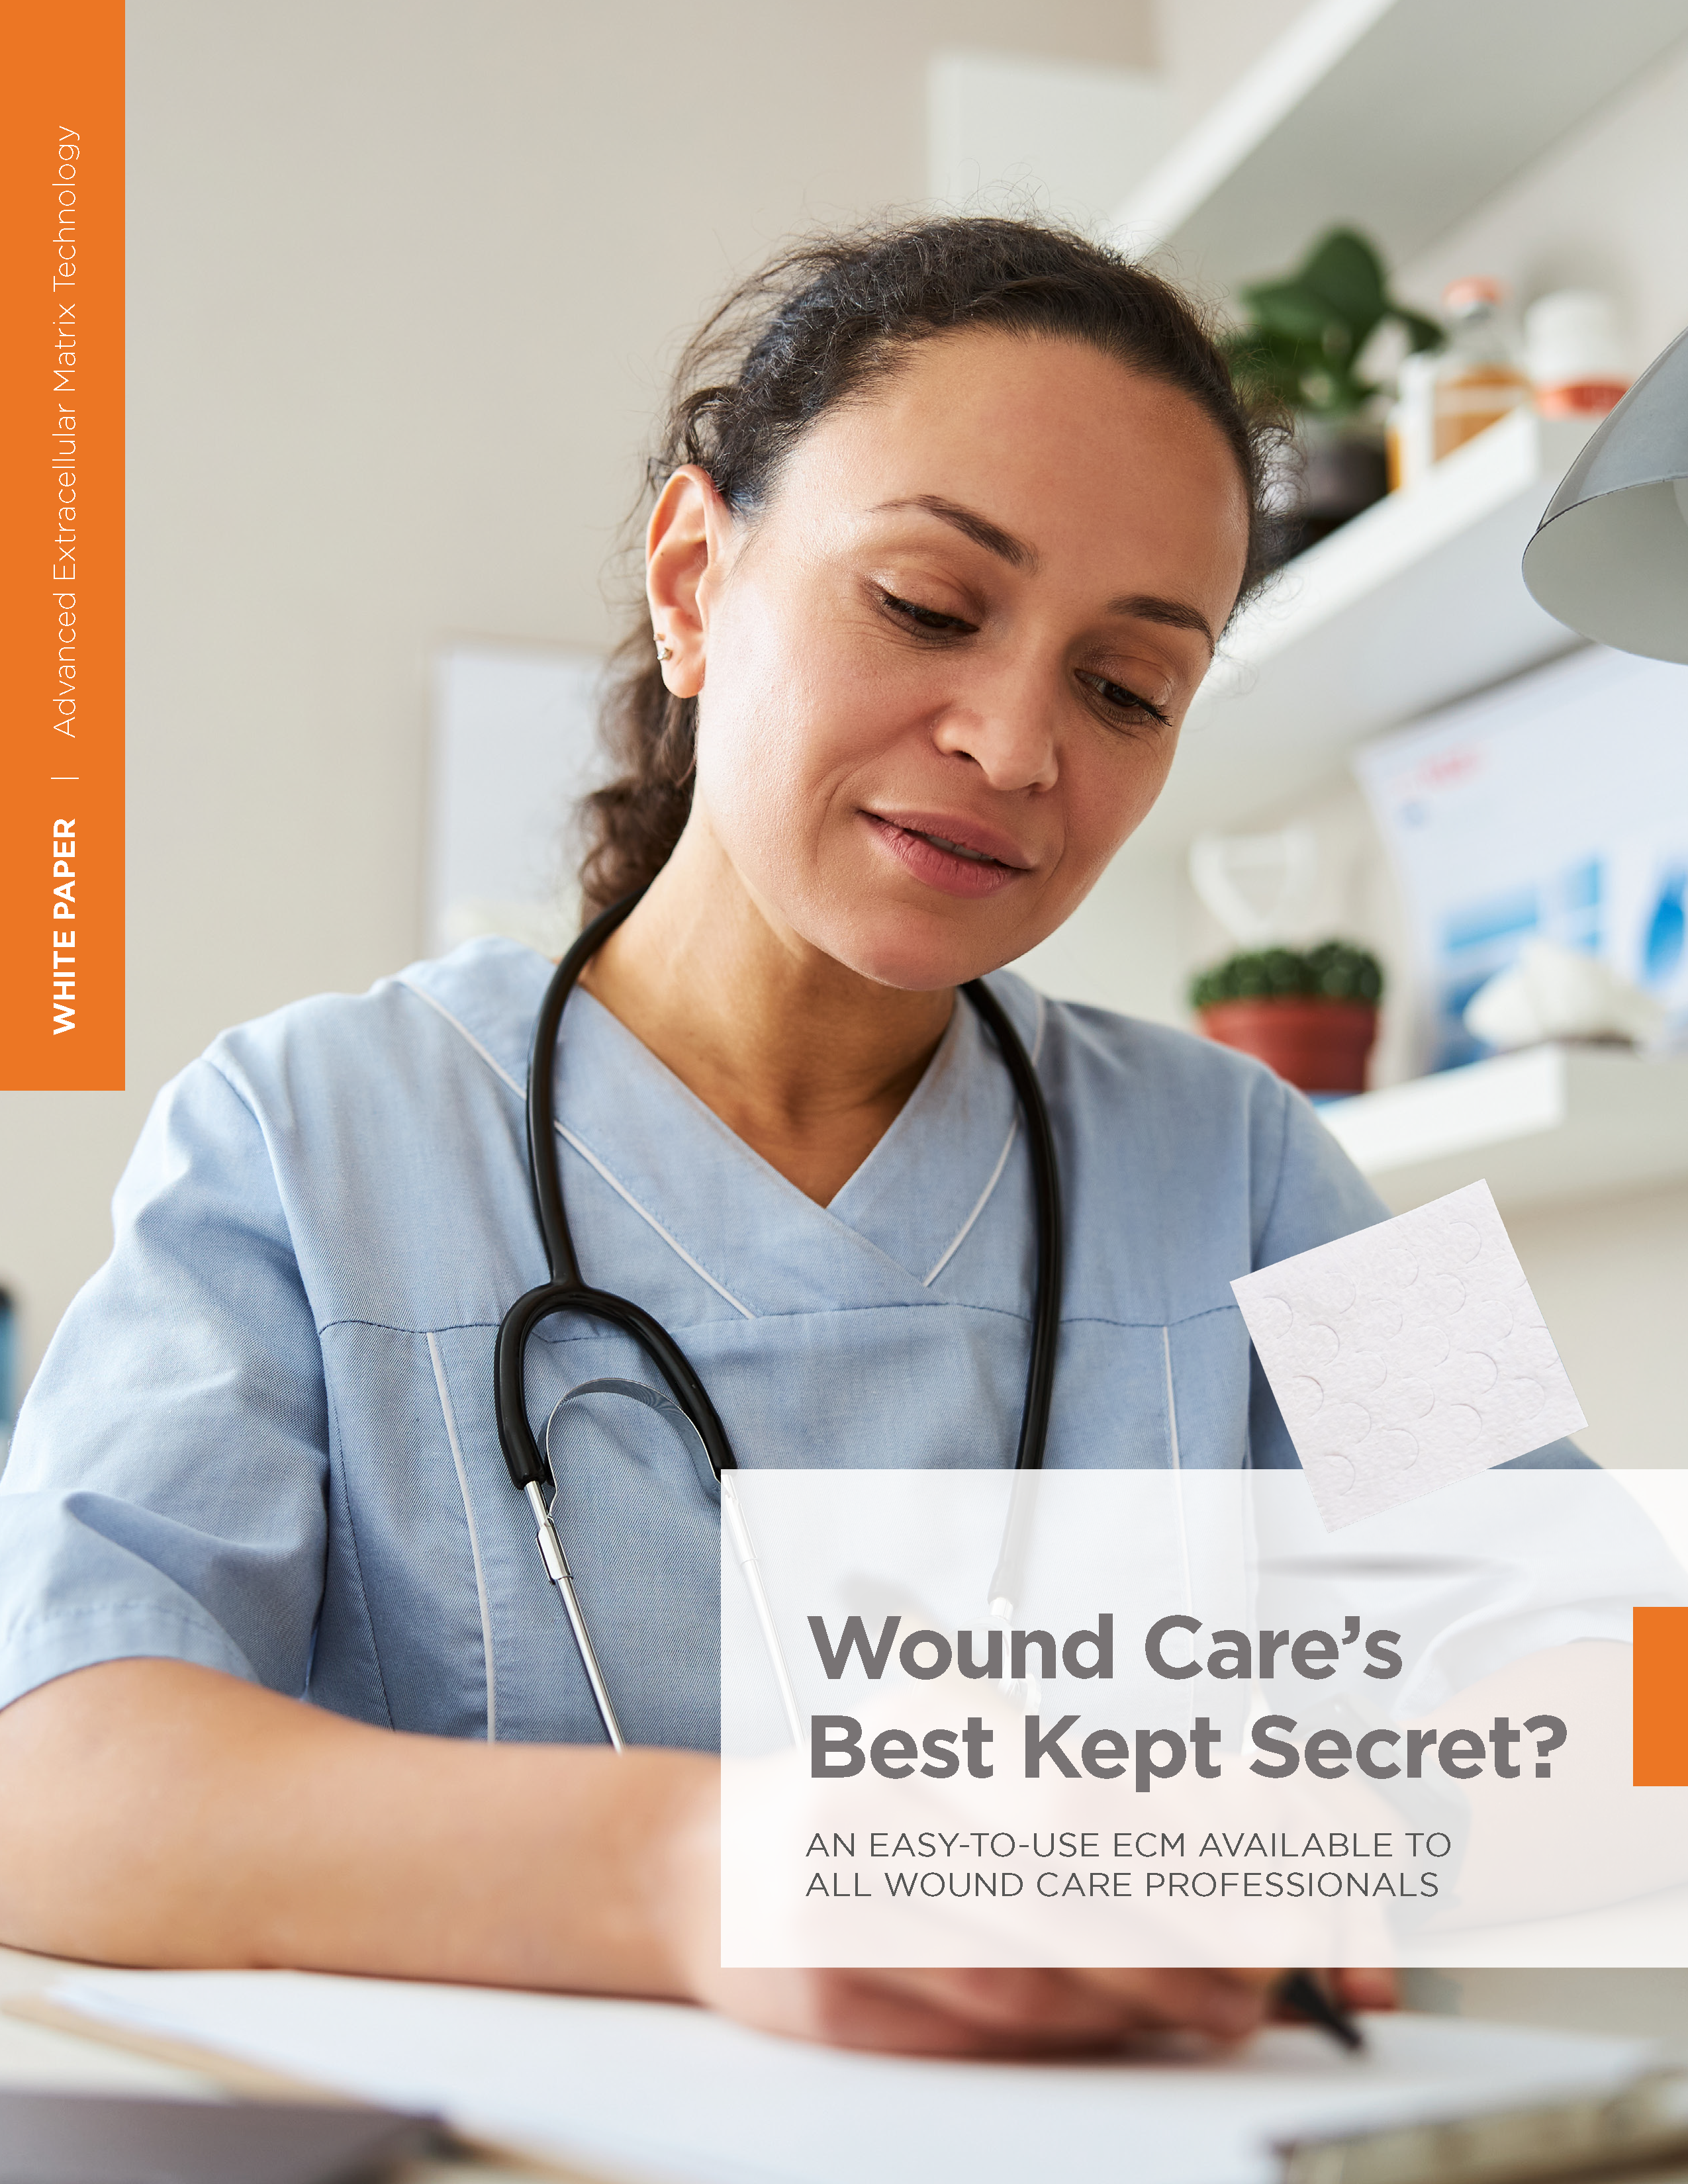 Wound Care's Best Kept Secret? An Easy-to-Use ECM Available to All Wound Care Professionals